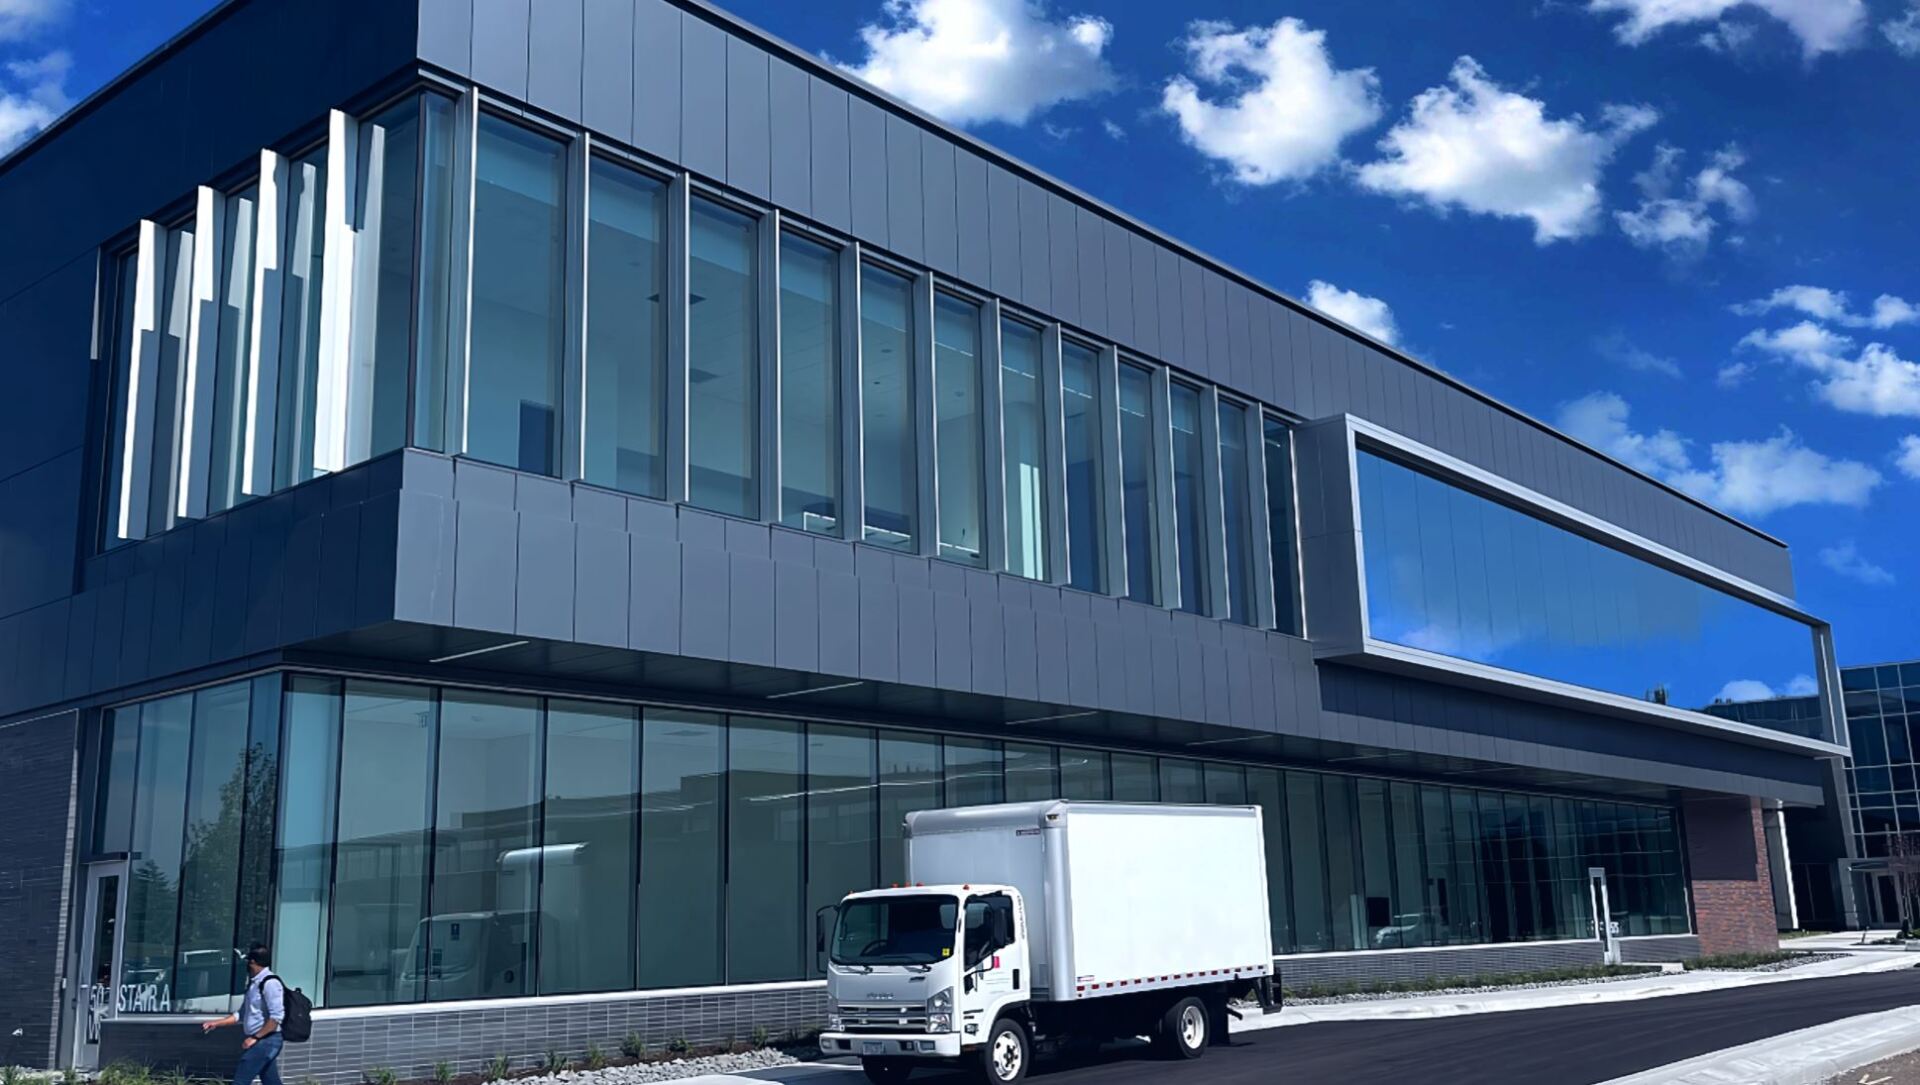 w l hall company The Premier Exterior and Interior Building Systems Provider in the Upper Midwest boston scientific glass & glazing 4